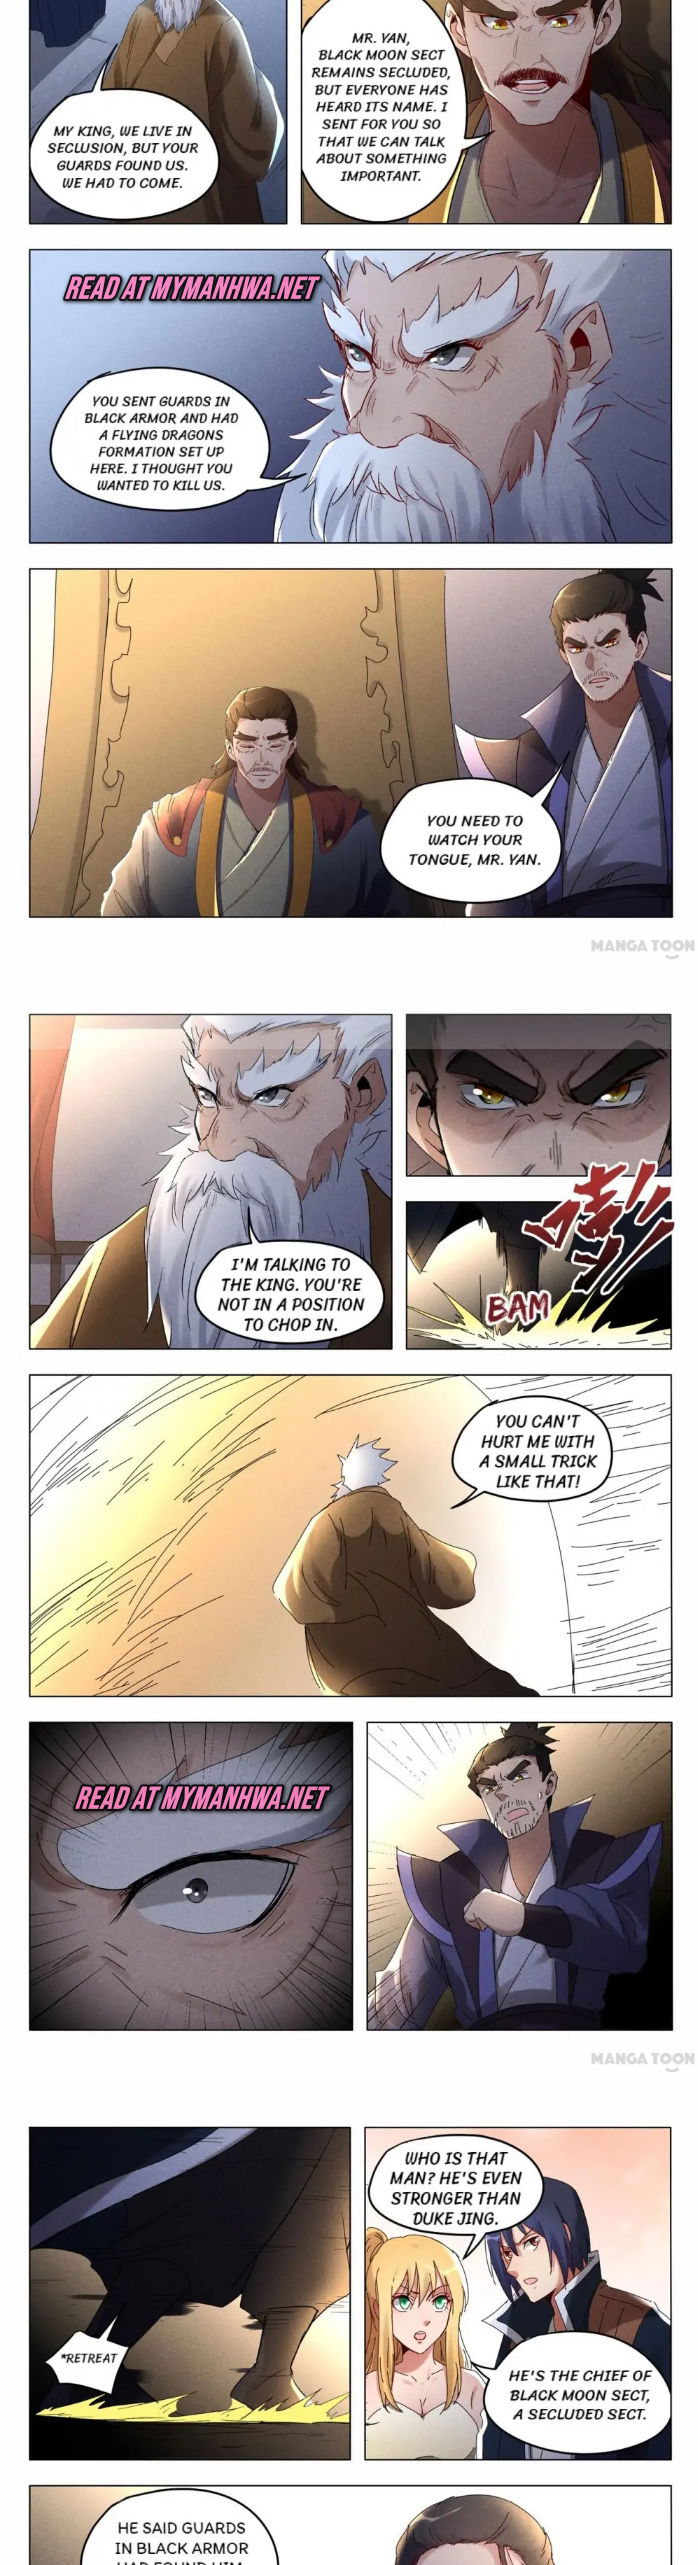 Master of Legendary Realms Chapter 419 page 3